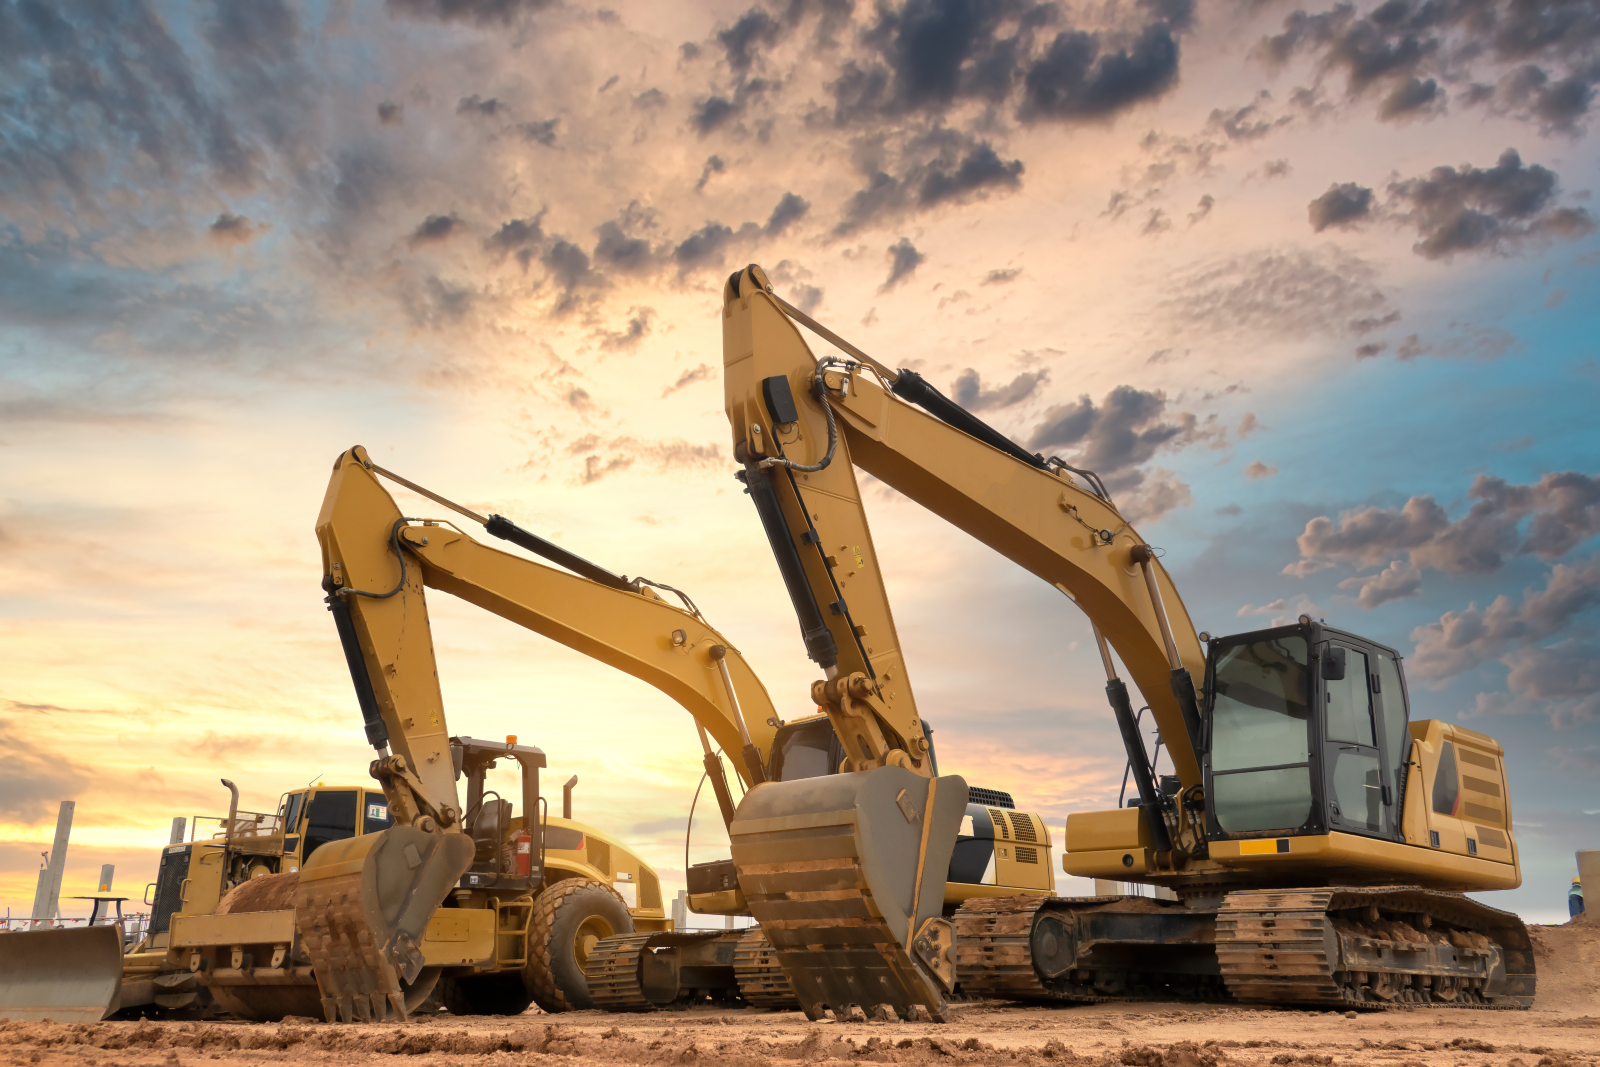 Image of two excavators on a construction site with a dramatic sky in the background